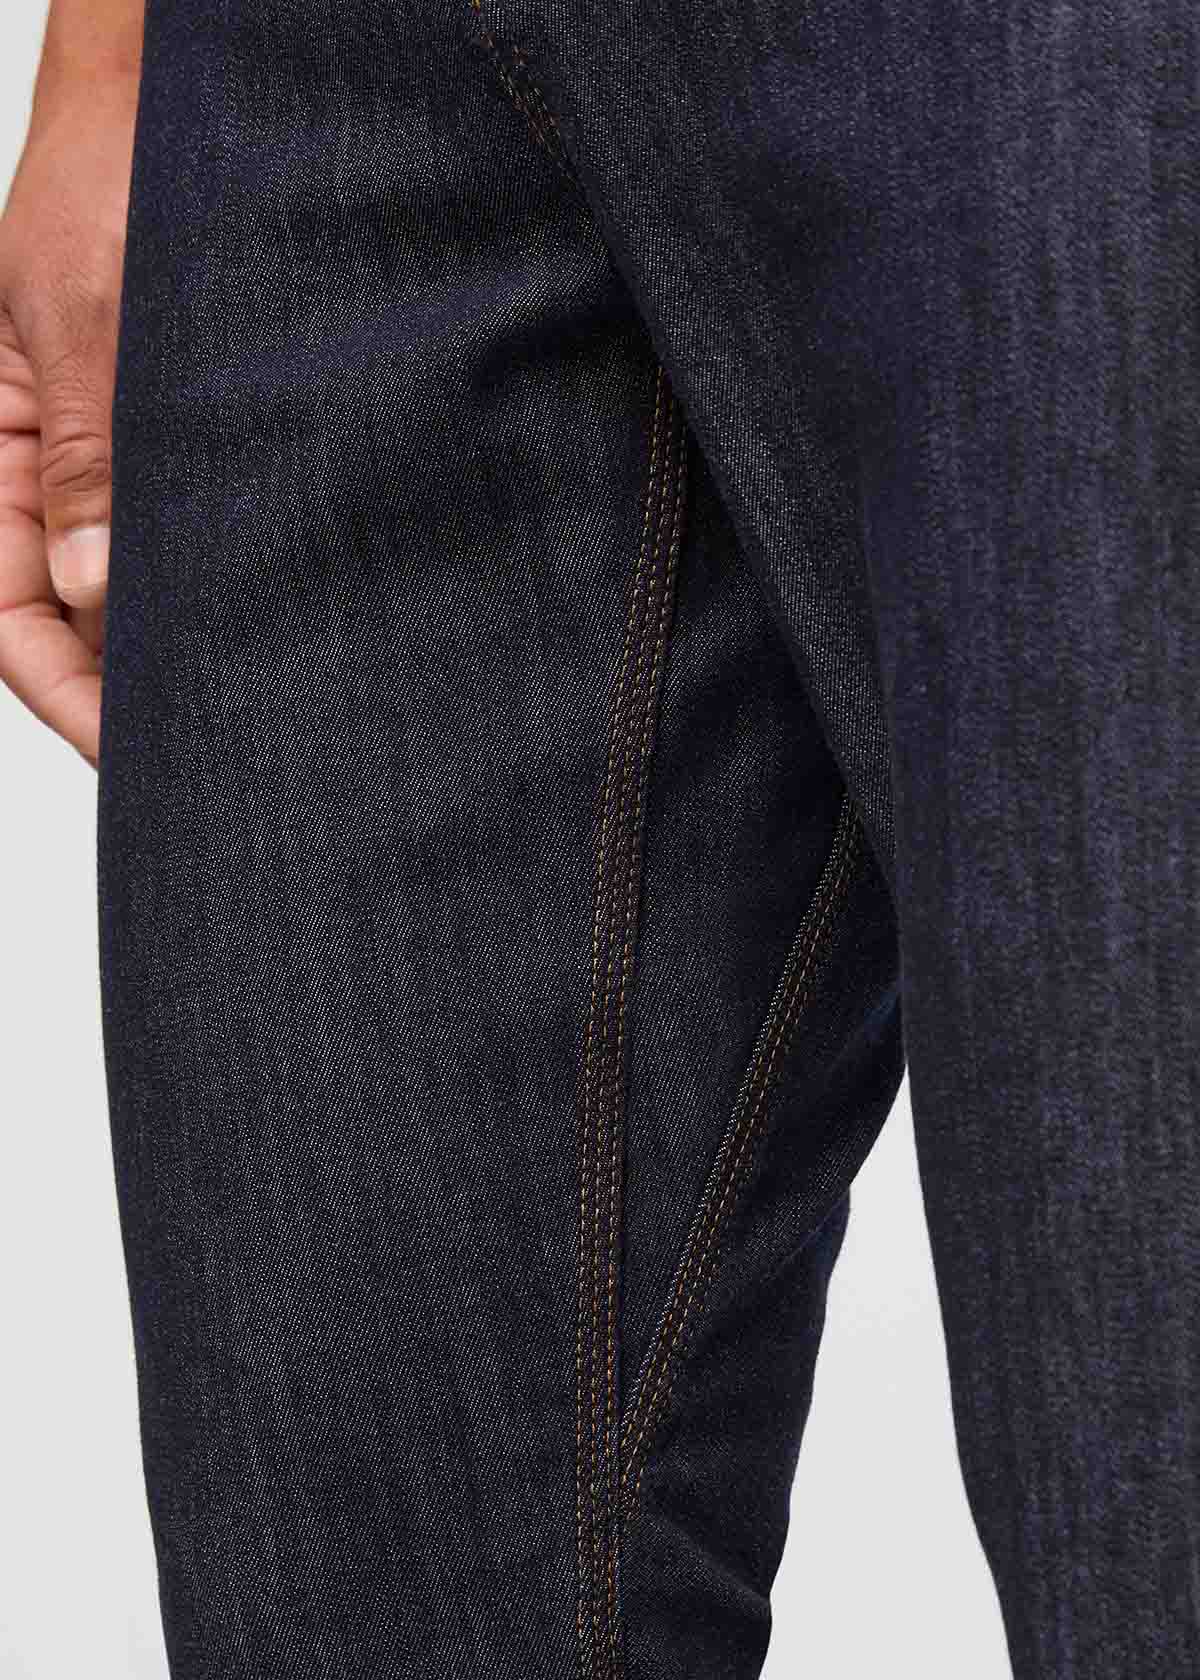 Men's Dark Blue Relaxed Fit Stretch Jeans